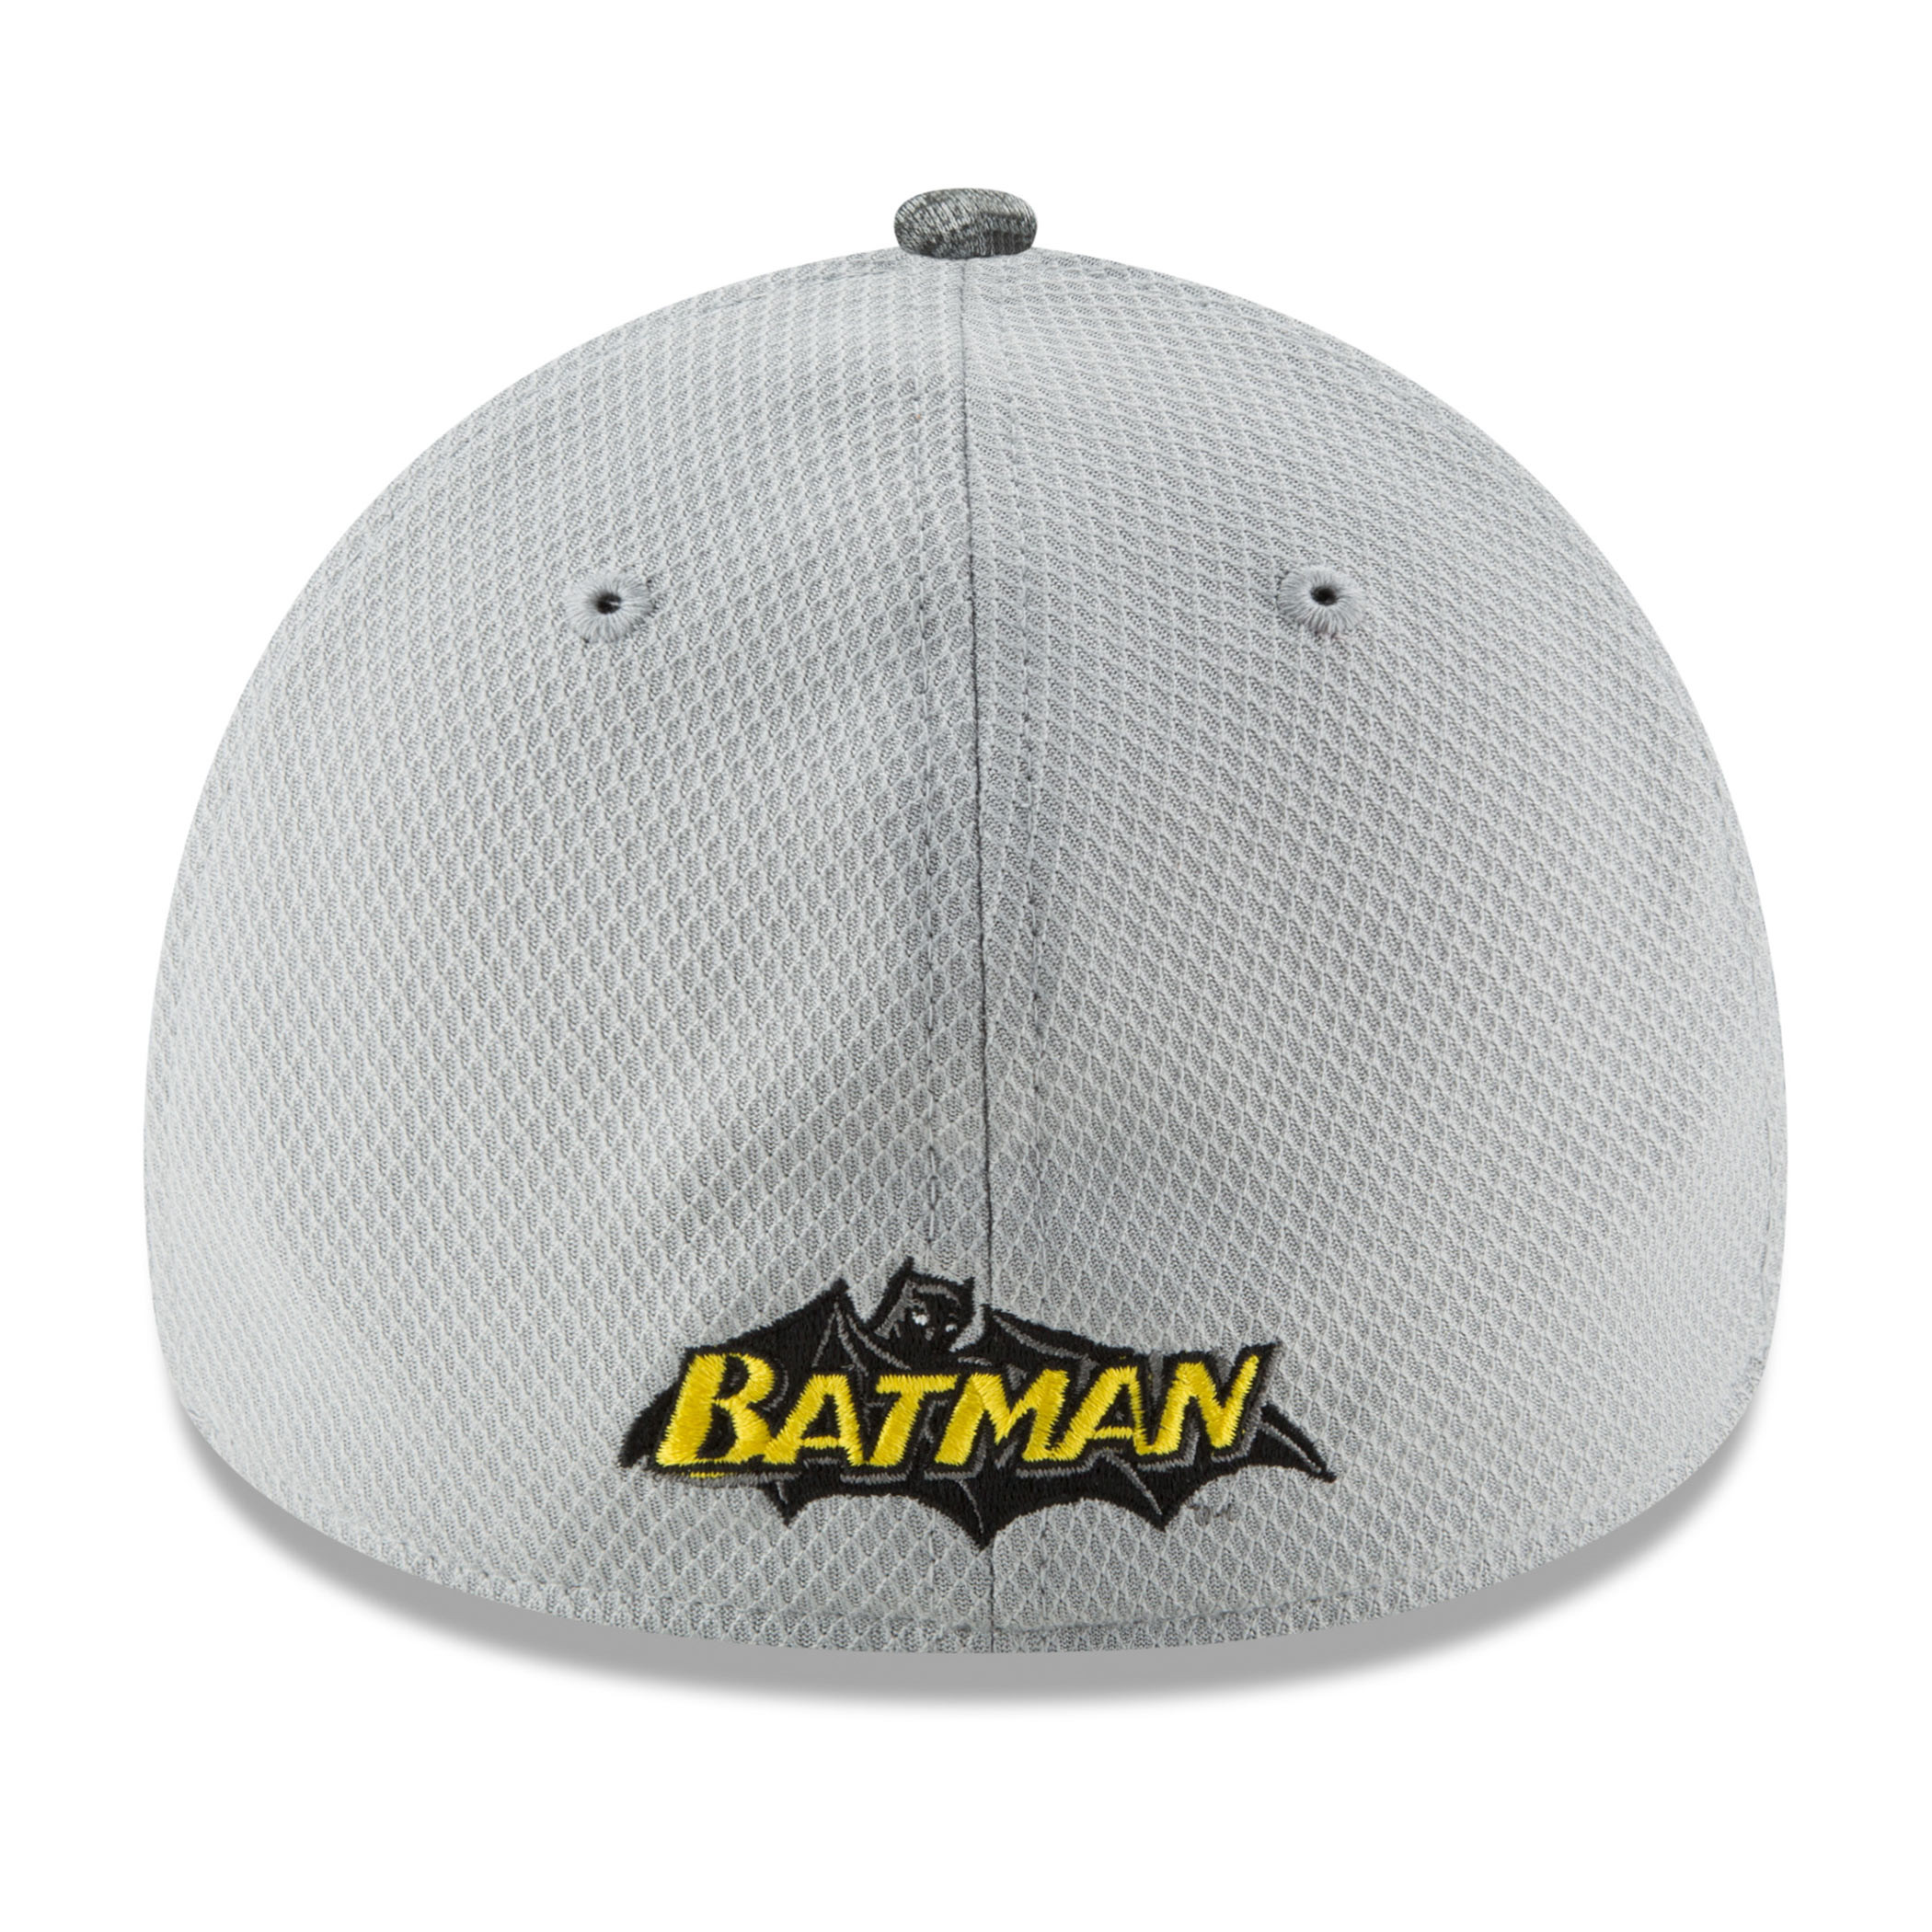 batman fitted hat